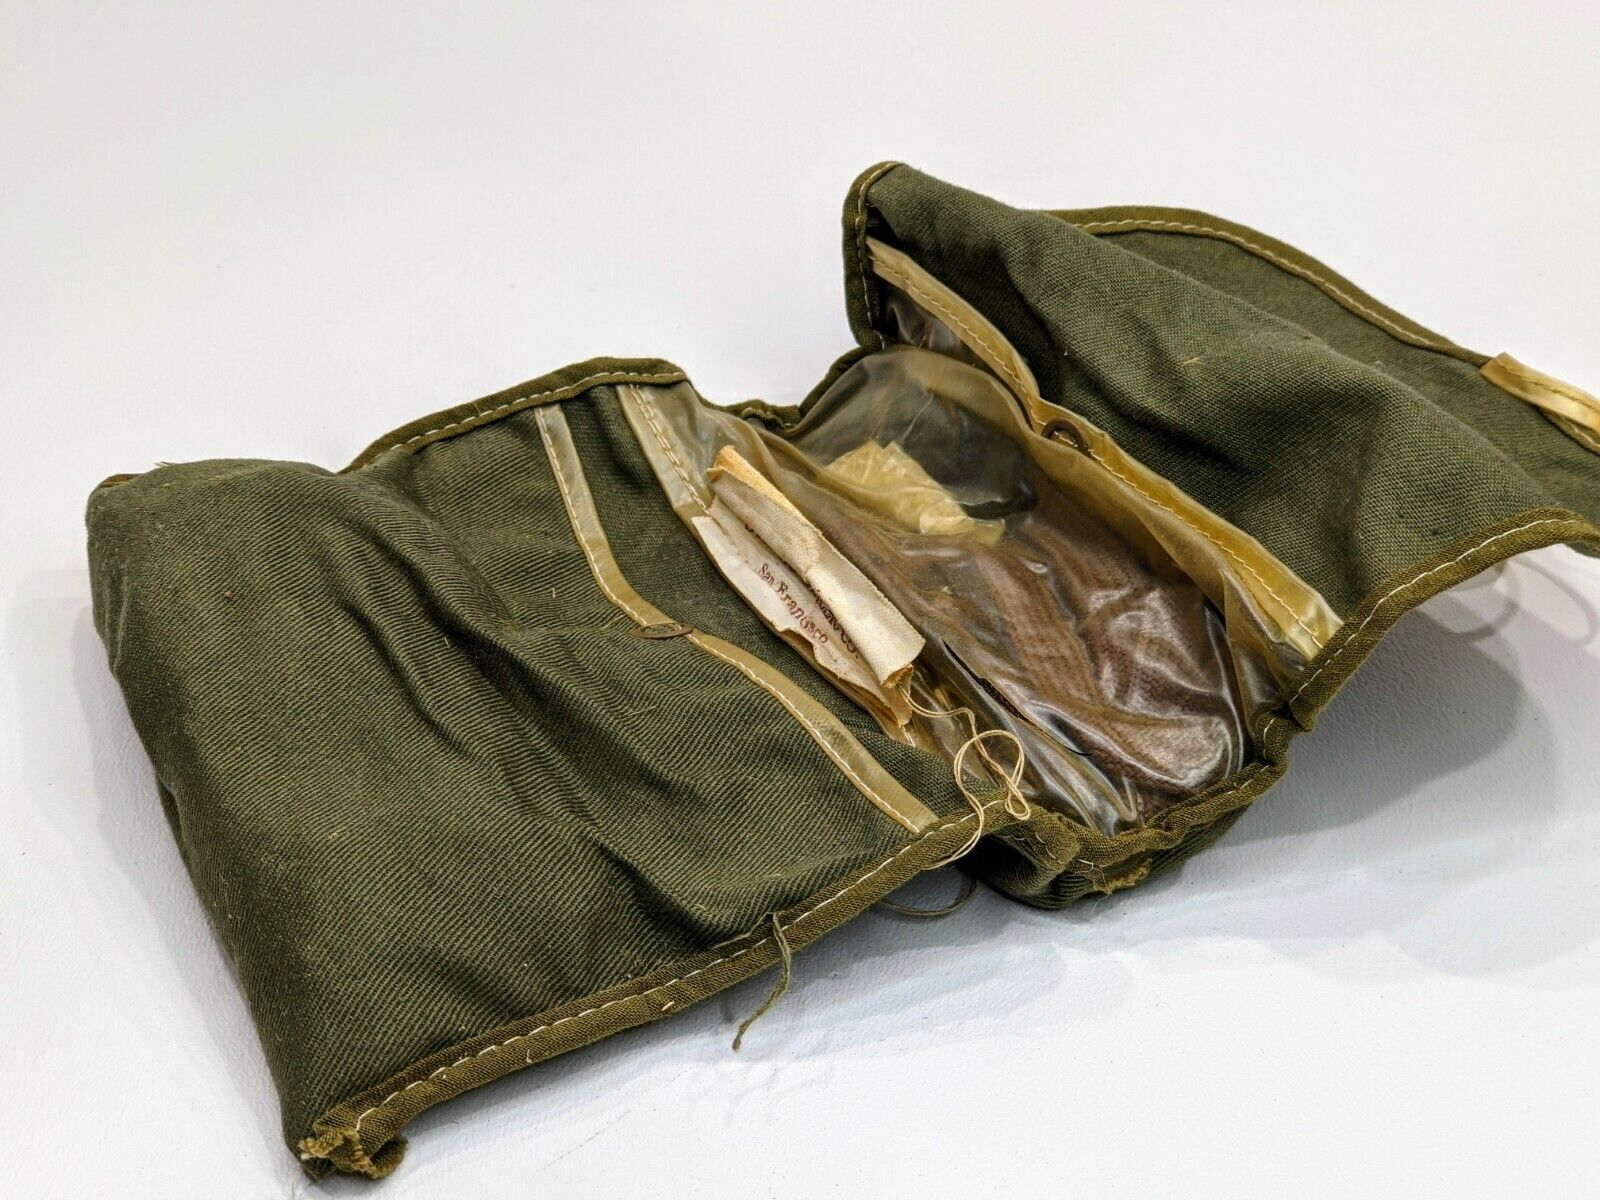 Vintage Military Roll Up Bag With Military Colored Sewing Material And Buttons